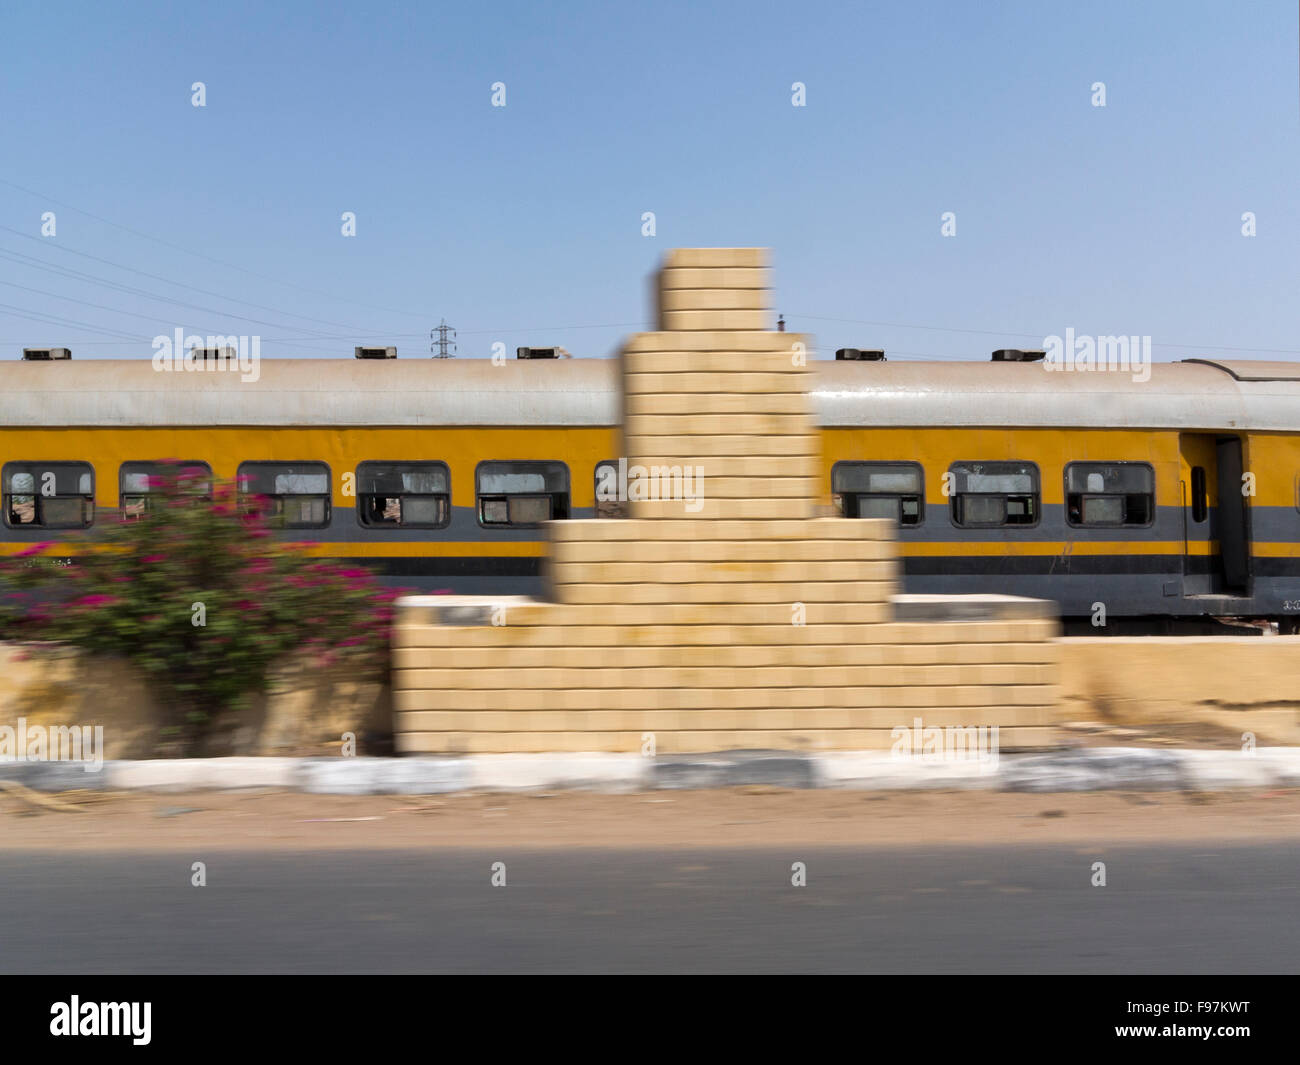 Train carriages passing at speed with movement blur on road and lamp post, Egypt, Africa Stock Photo